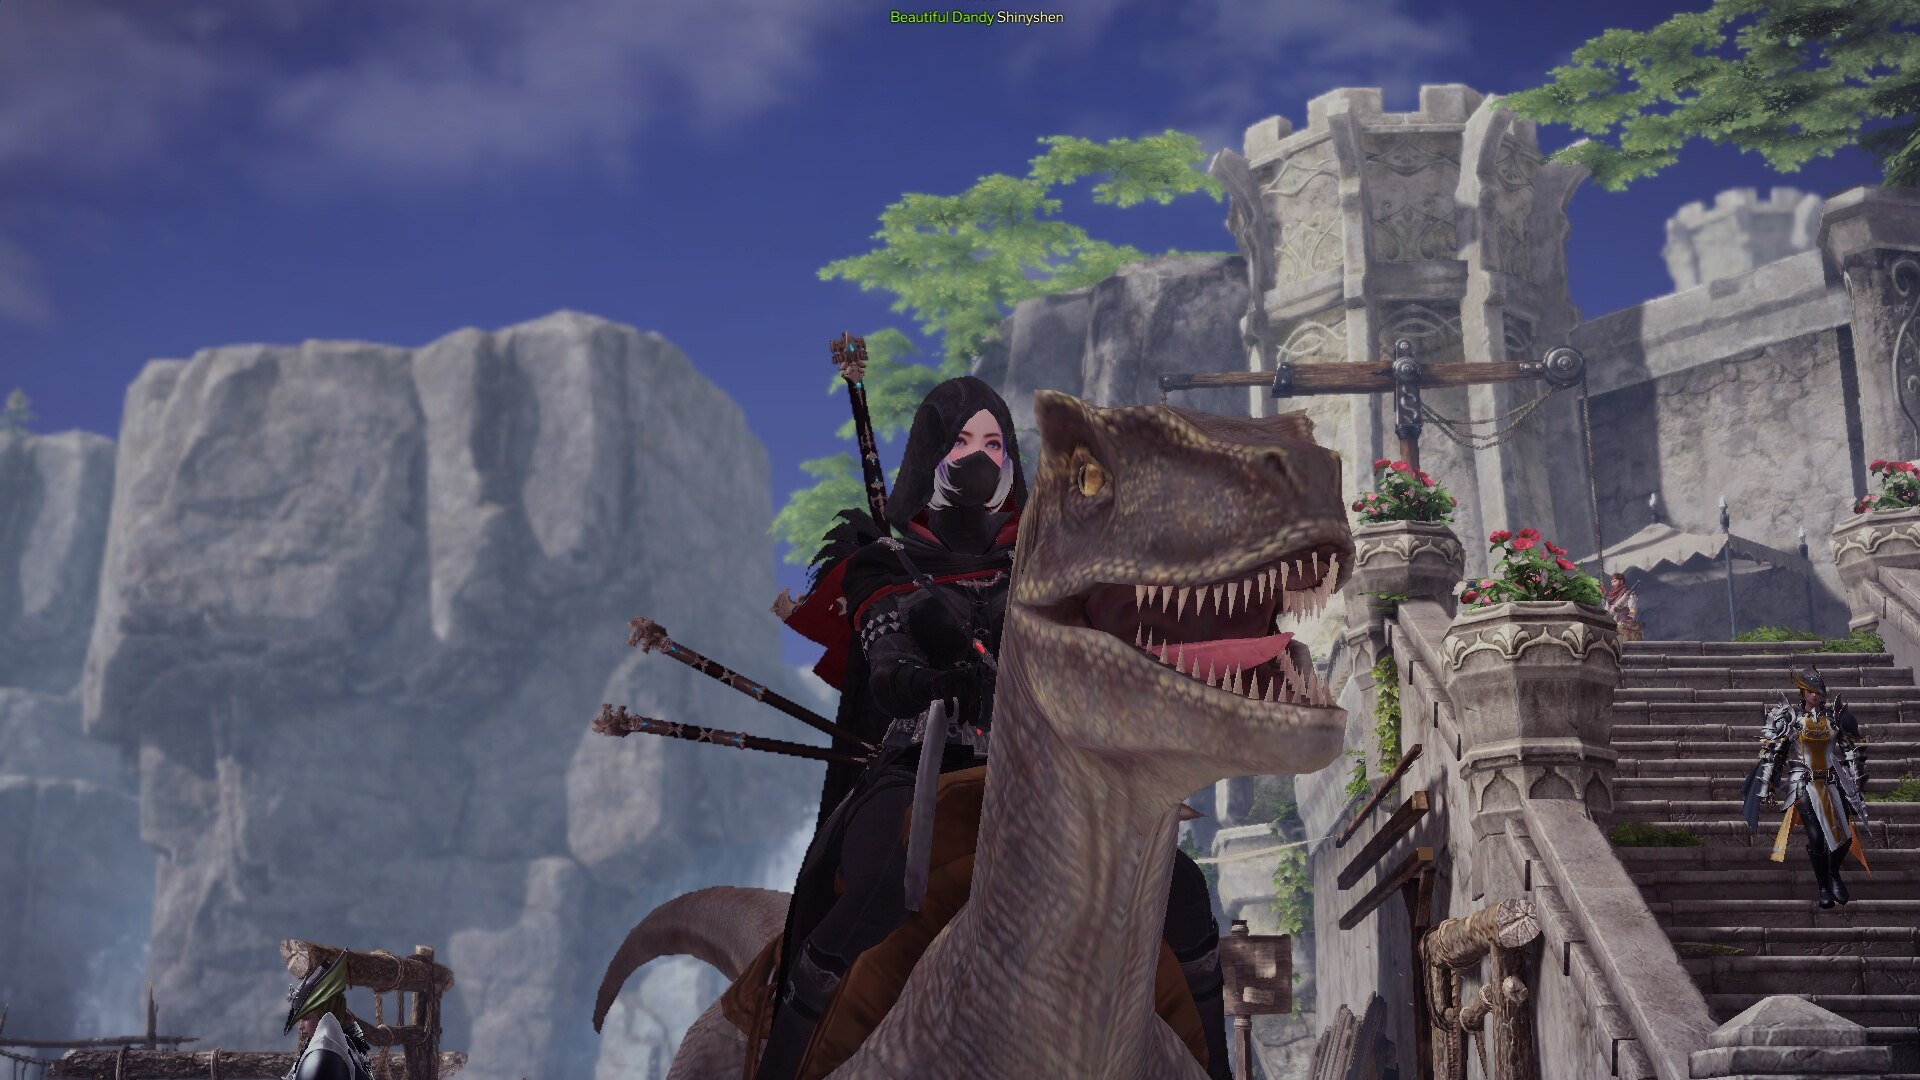 Armored Raptor Mount Coming to Lost Ark With Prime Gaming - News - Icy Veins